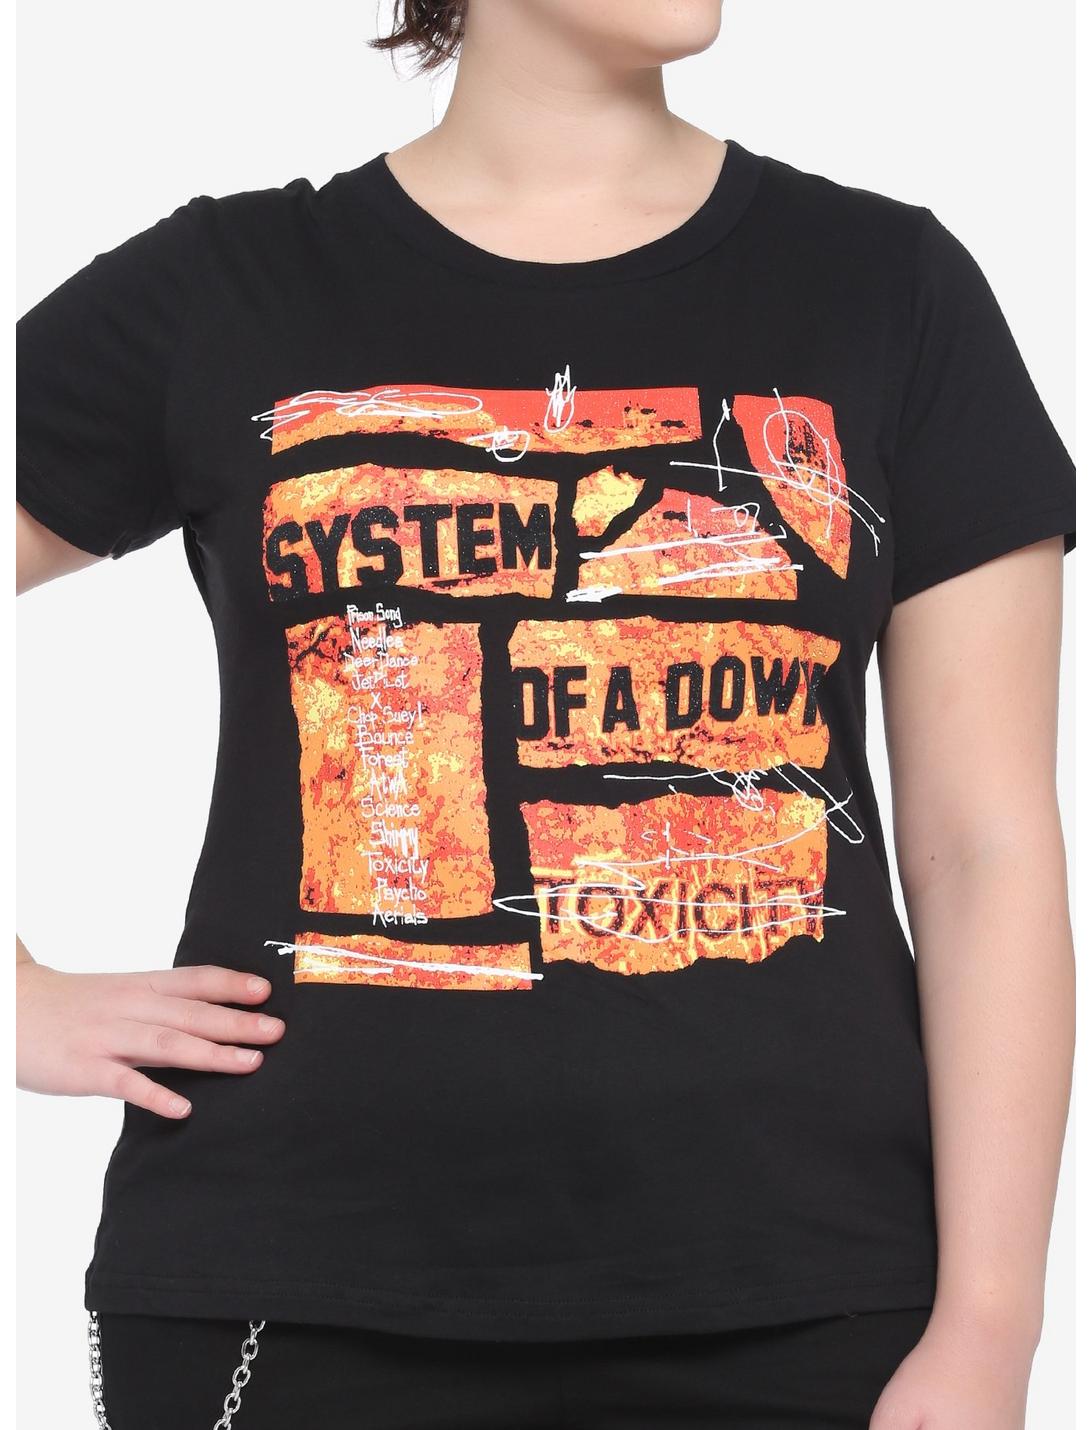 System Of A Down Toxicity Collage Girls T-Shirt Plus Size, BLACK, hi-res